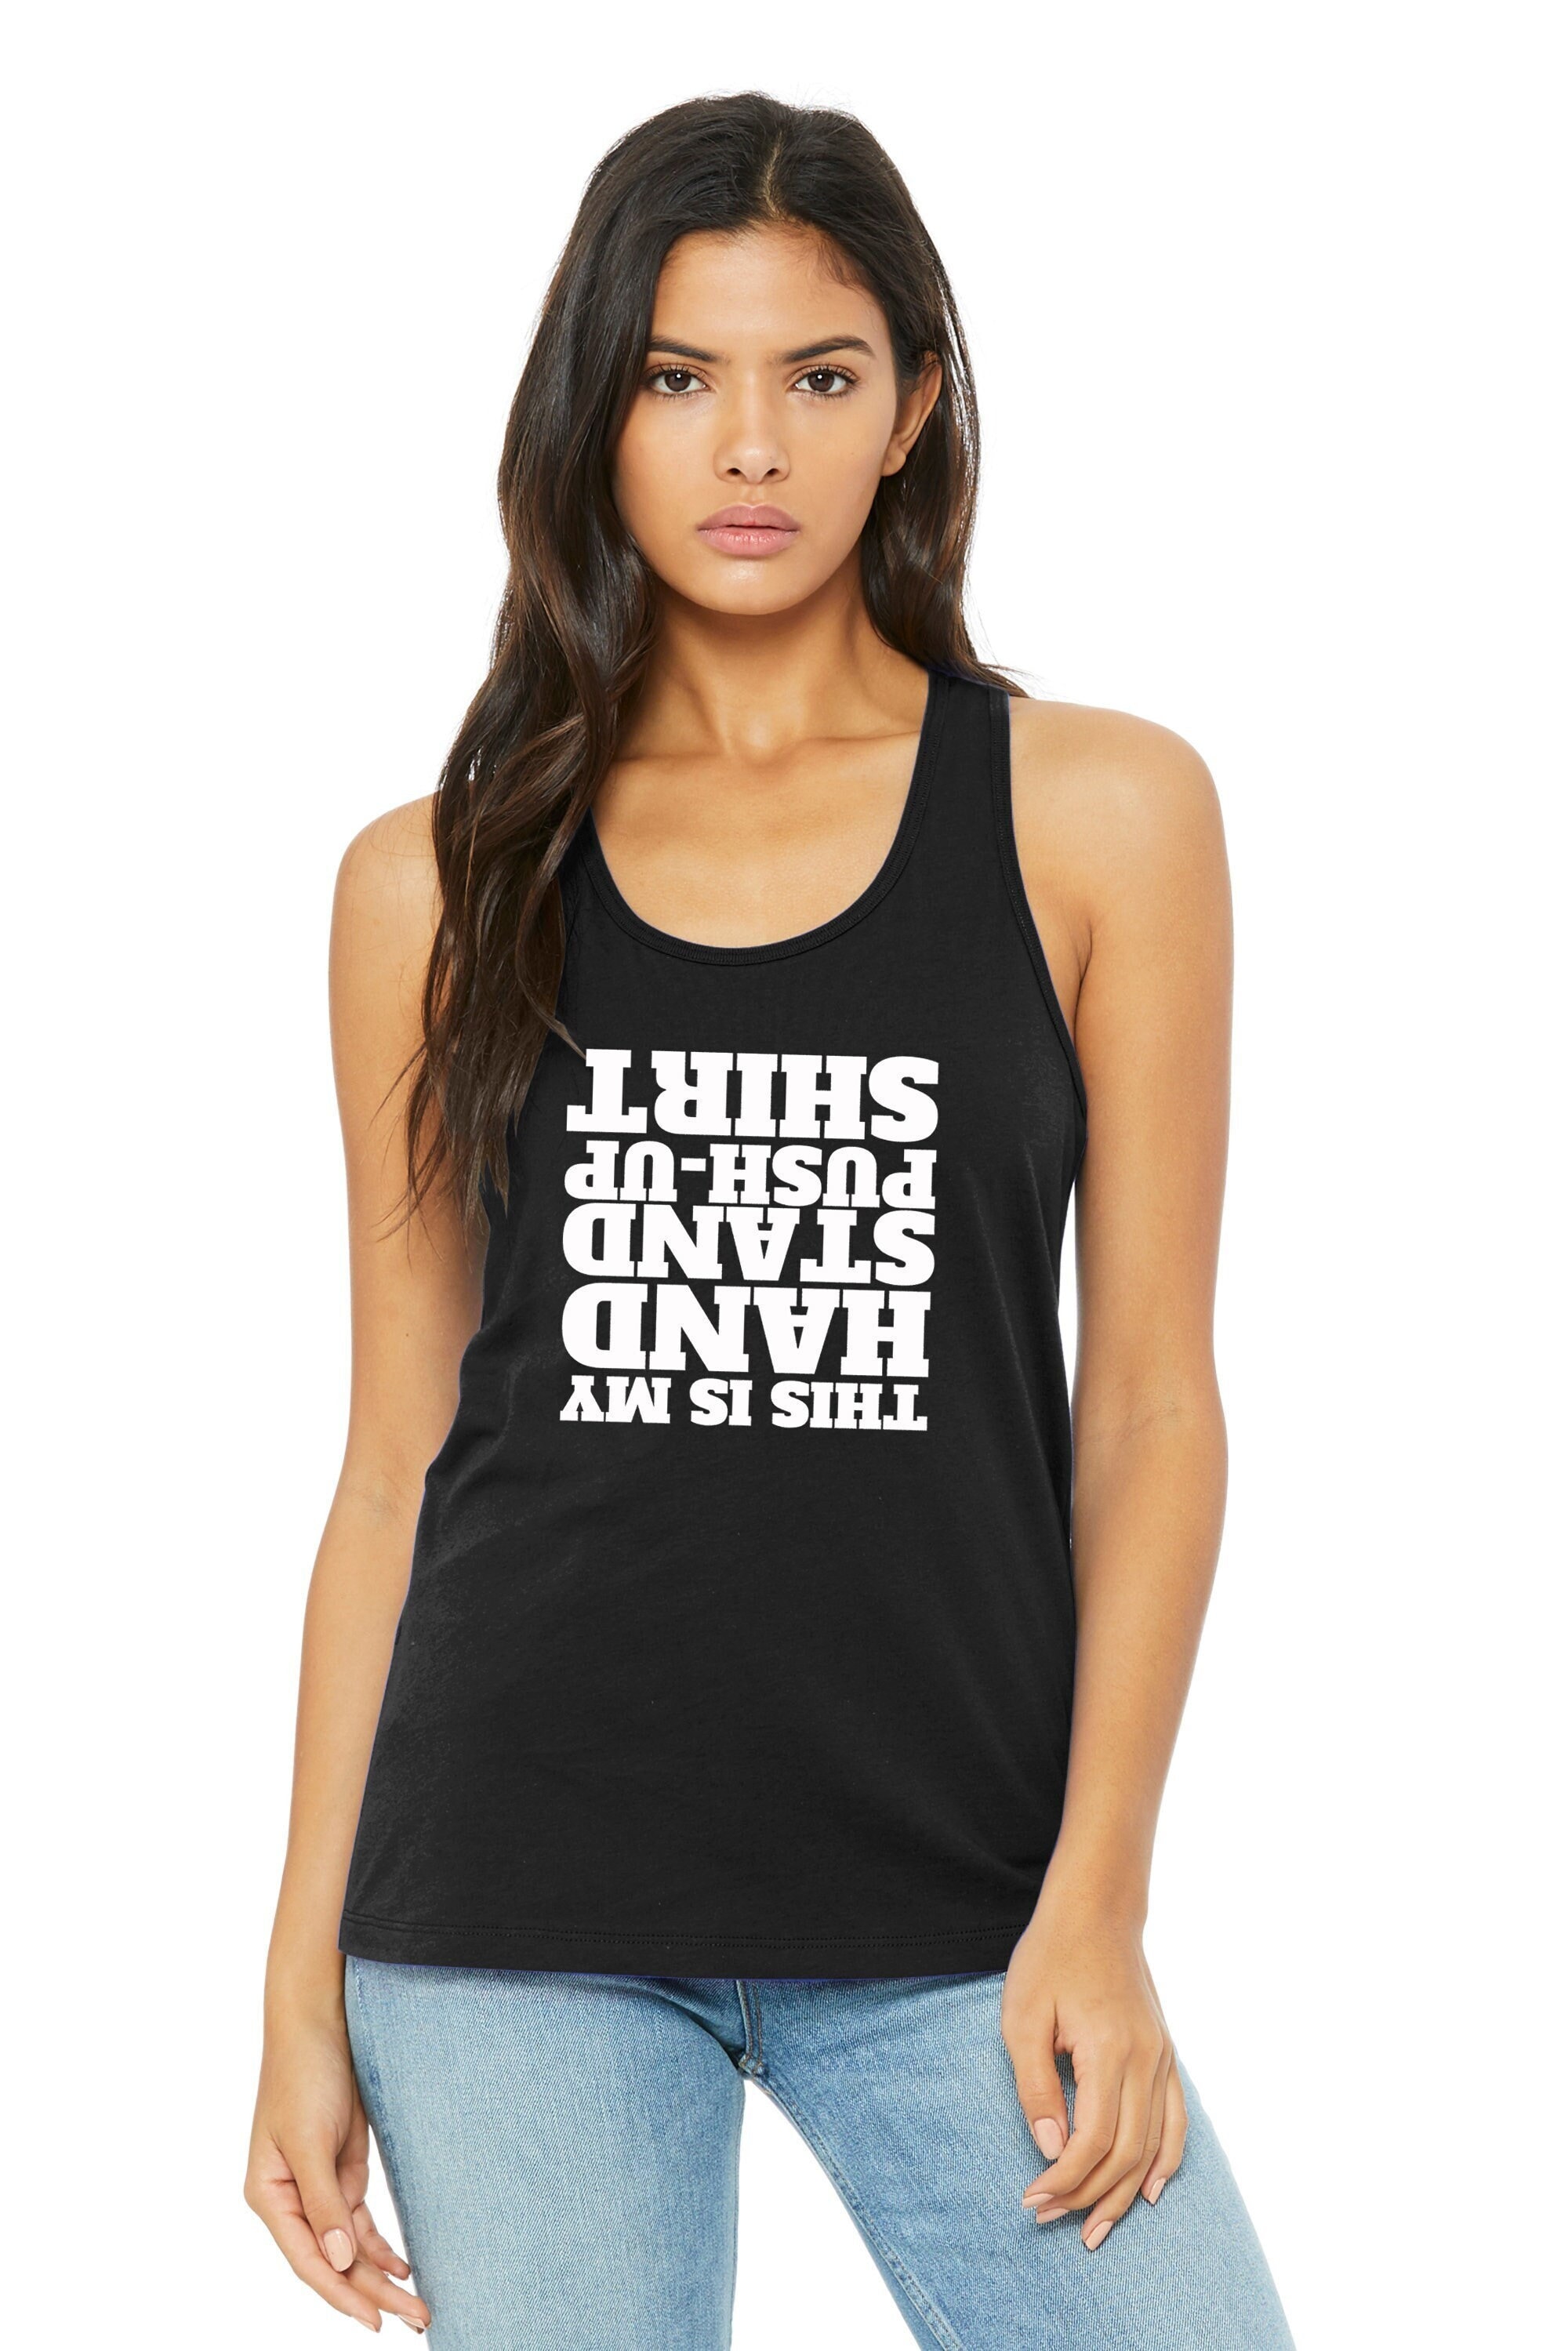 This is My Handstand PUSH-UP Shirt Ladies Racerback Tank Top 